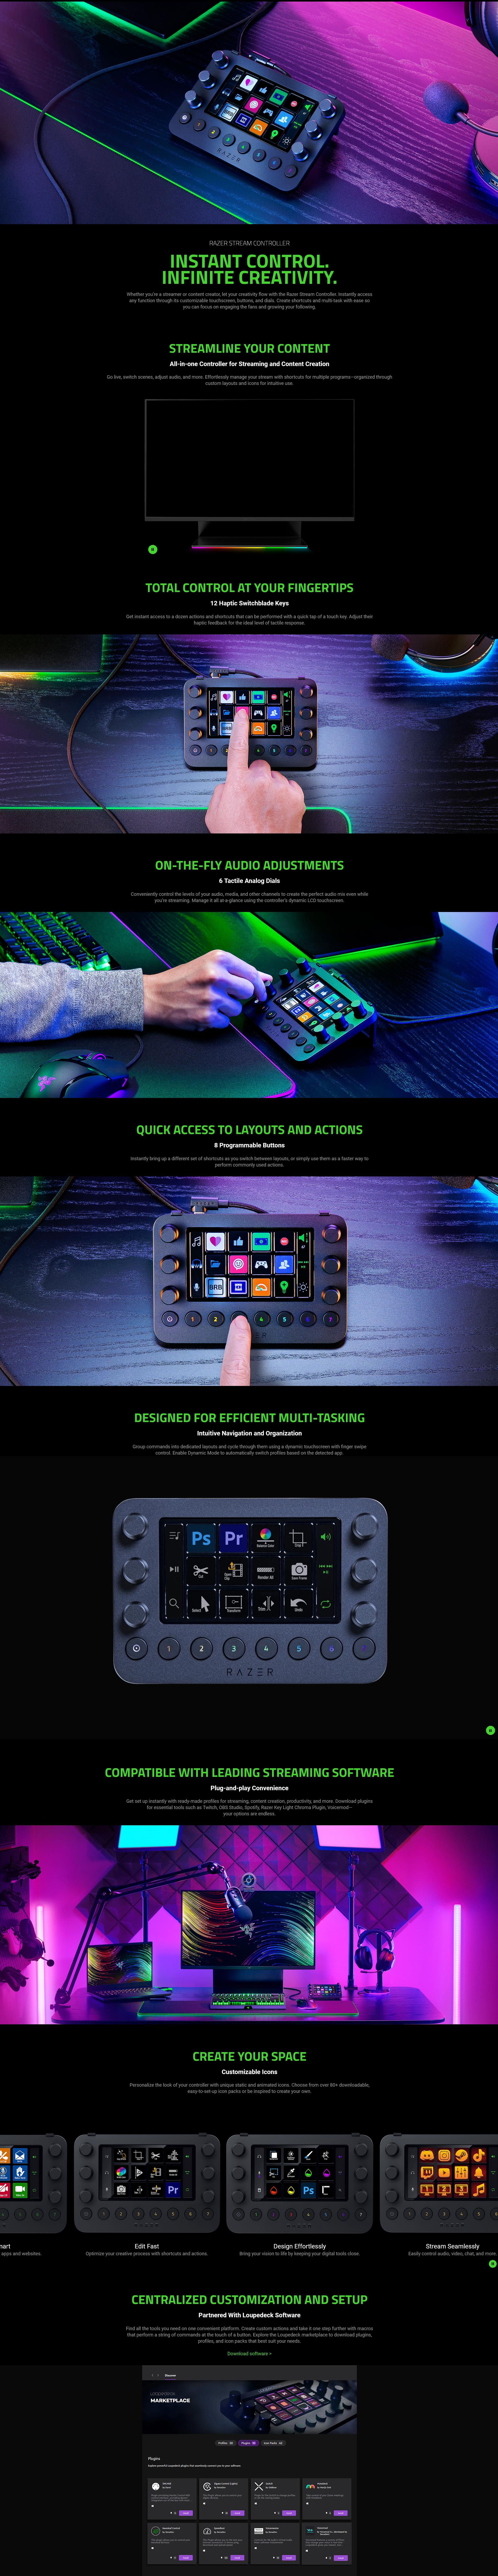 A large marketing image providing additional information about the product Razer Stream Controller - All-in-one Keypad for Streaming - Additional alt info not provided